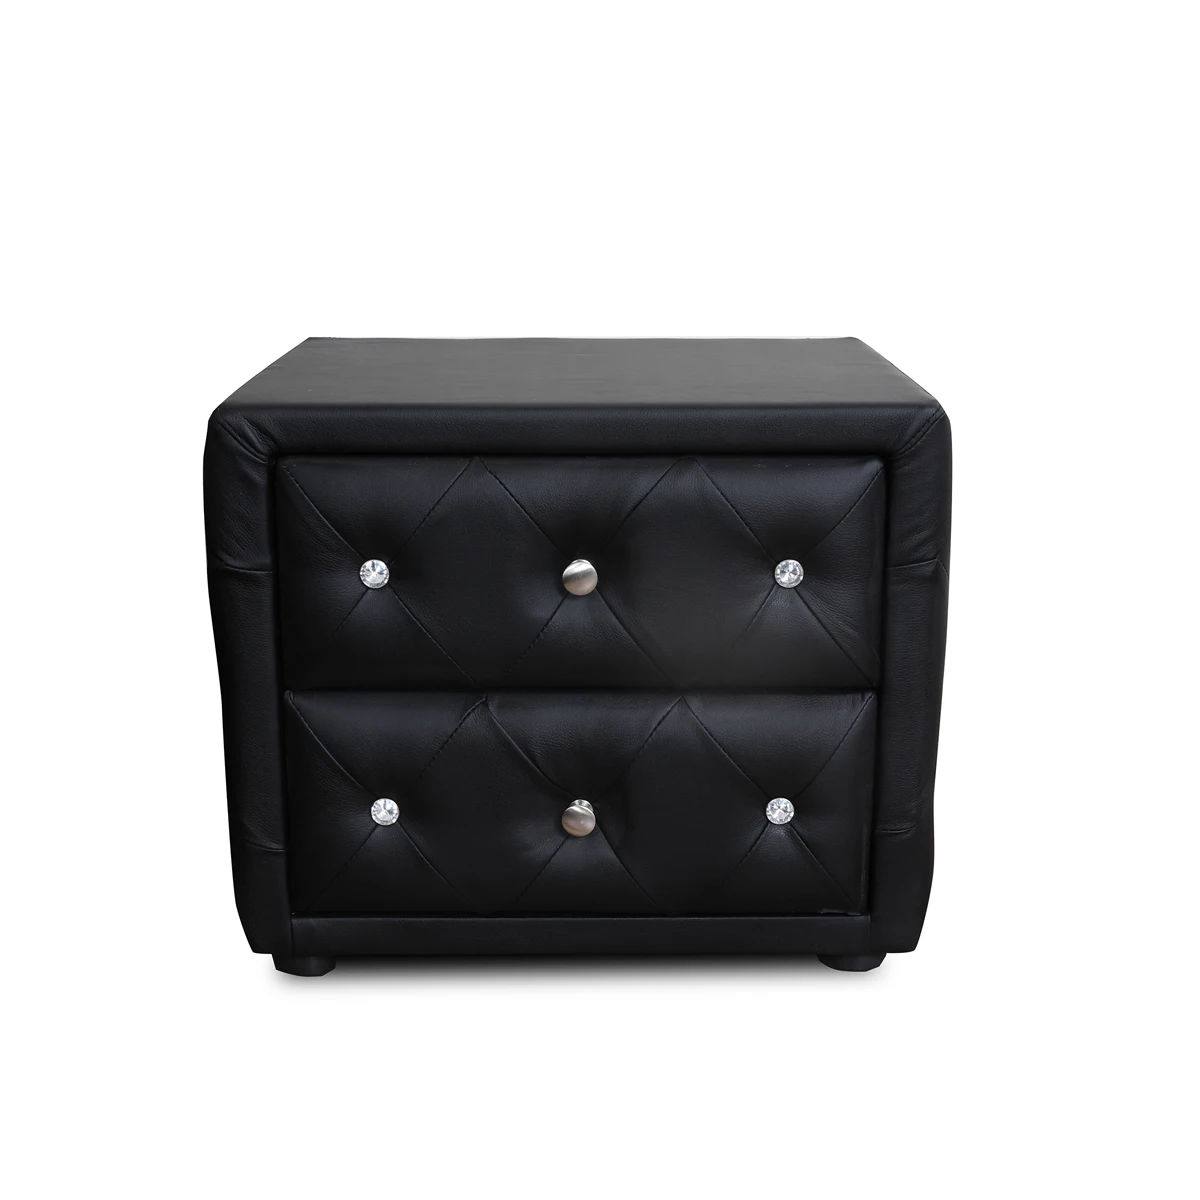 Black Nightstands 2019 Bedroom Furniture Wooden Home Furniture Modern Solid Wood French Style Unique Hotel Carton Box Shen Zhen